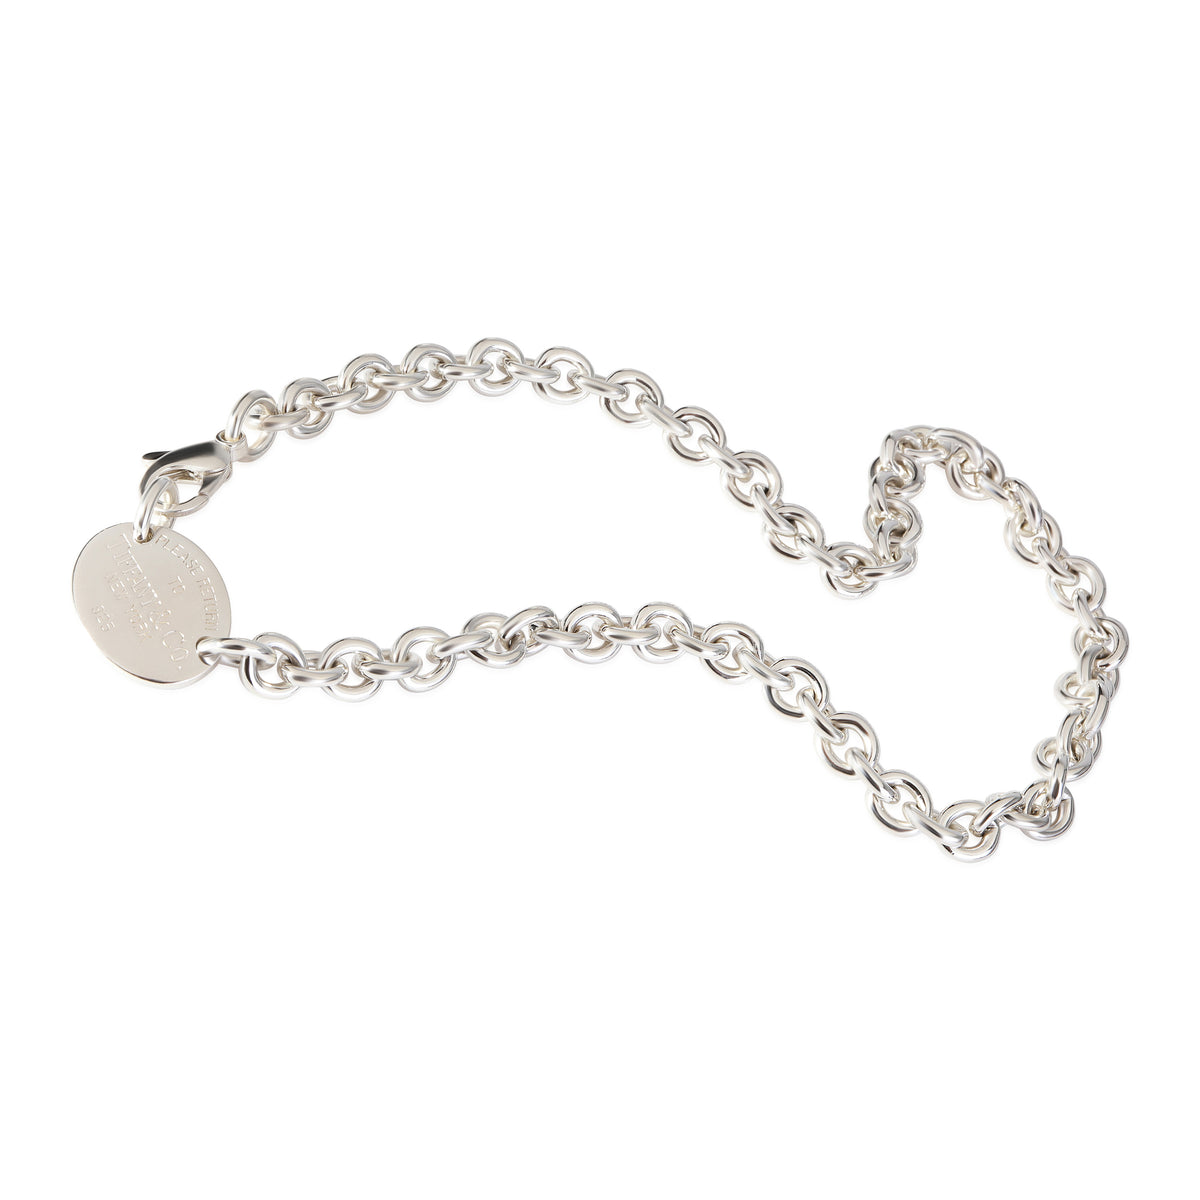 Tiffany & Co. Return To Tiffany Oval Tag Necklace in Sterling Silver